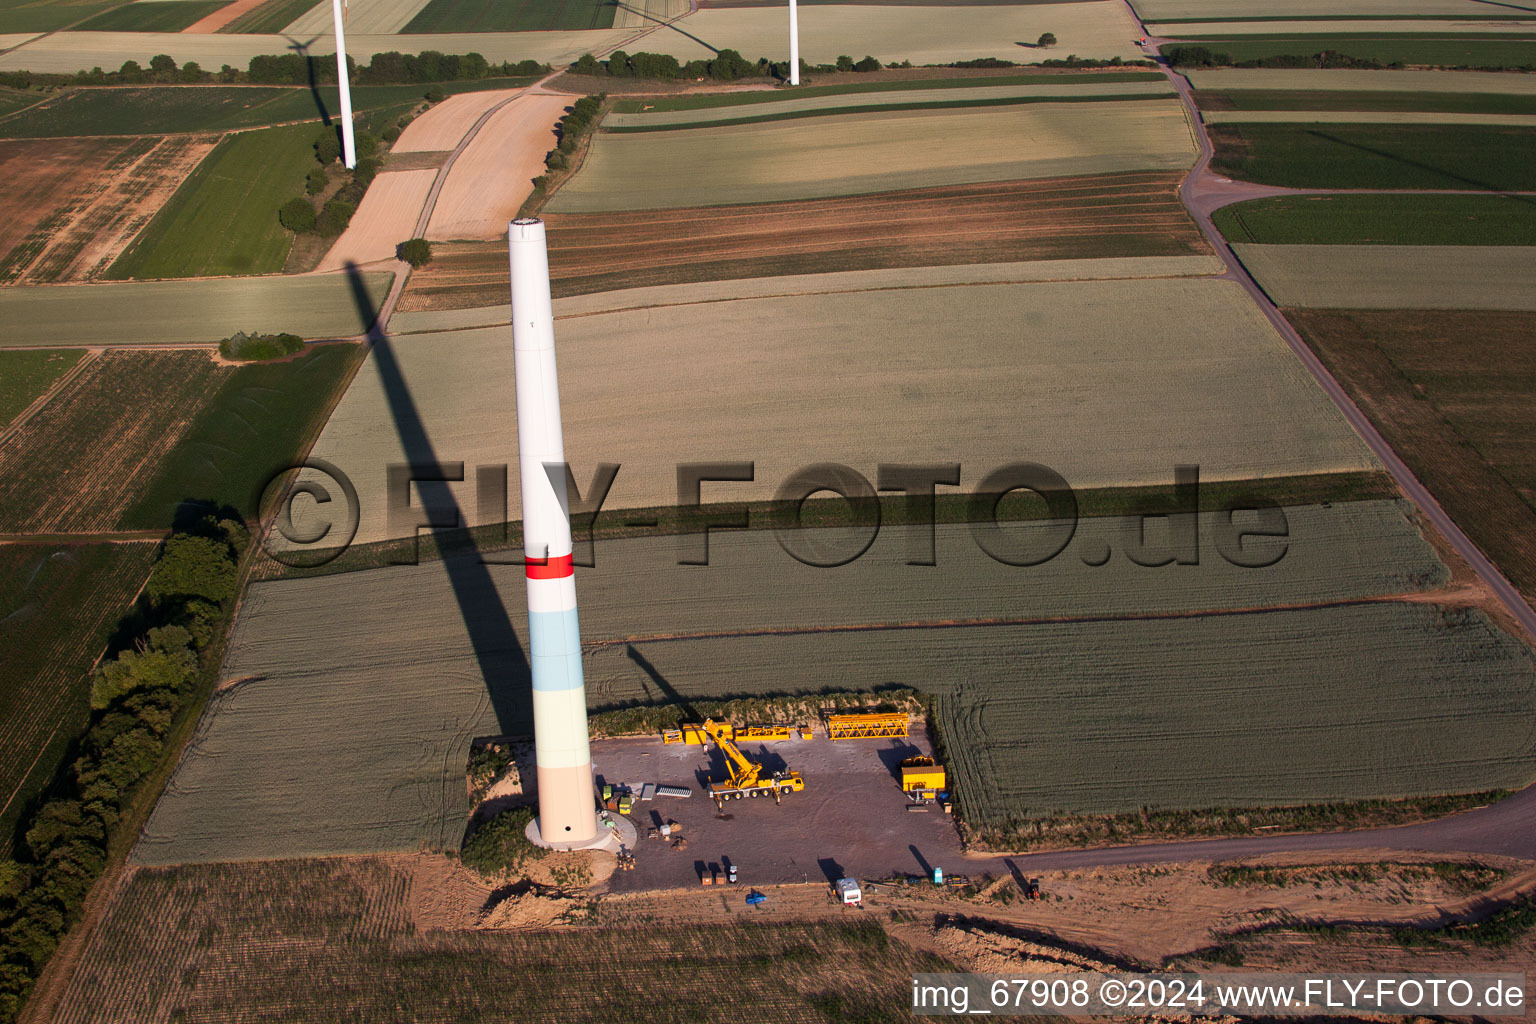 New wind farm in Offenbach an der Queich in the state Rhineland-Palatinate, Germany from above